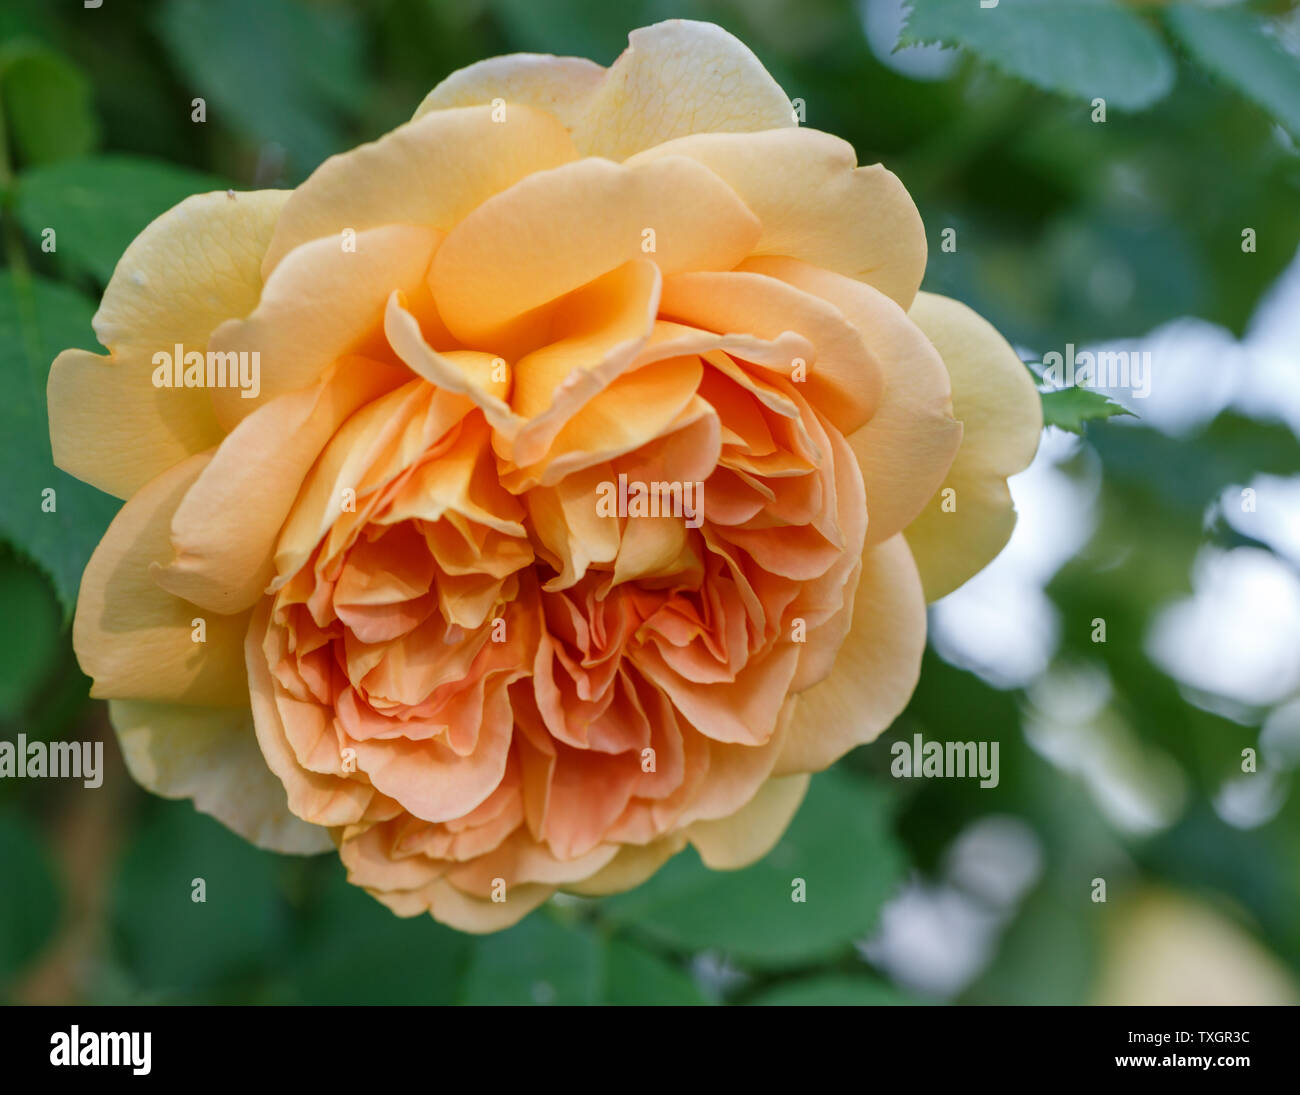 Blooming yellow rose in the garden on a sunny day. David Austin Rose Golden Celebration Stock Photo